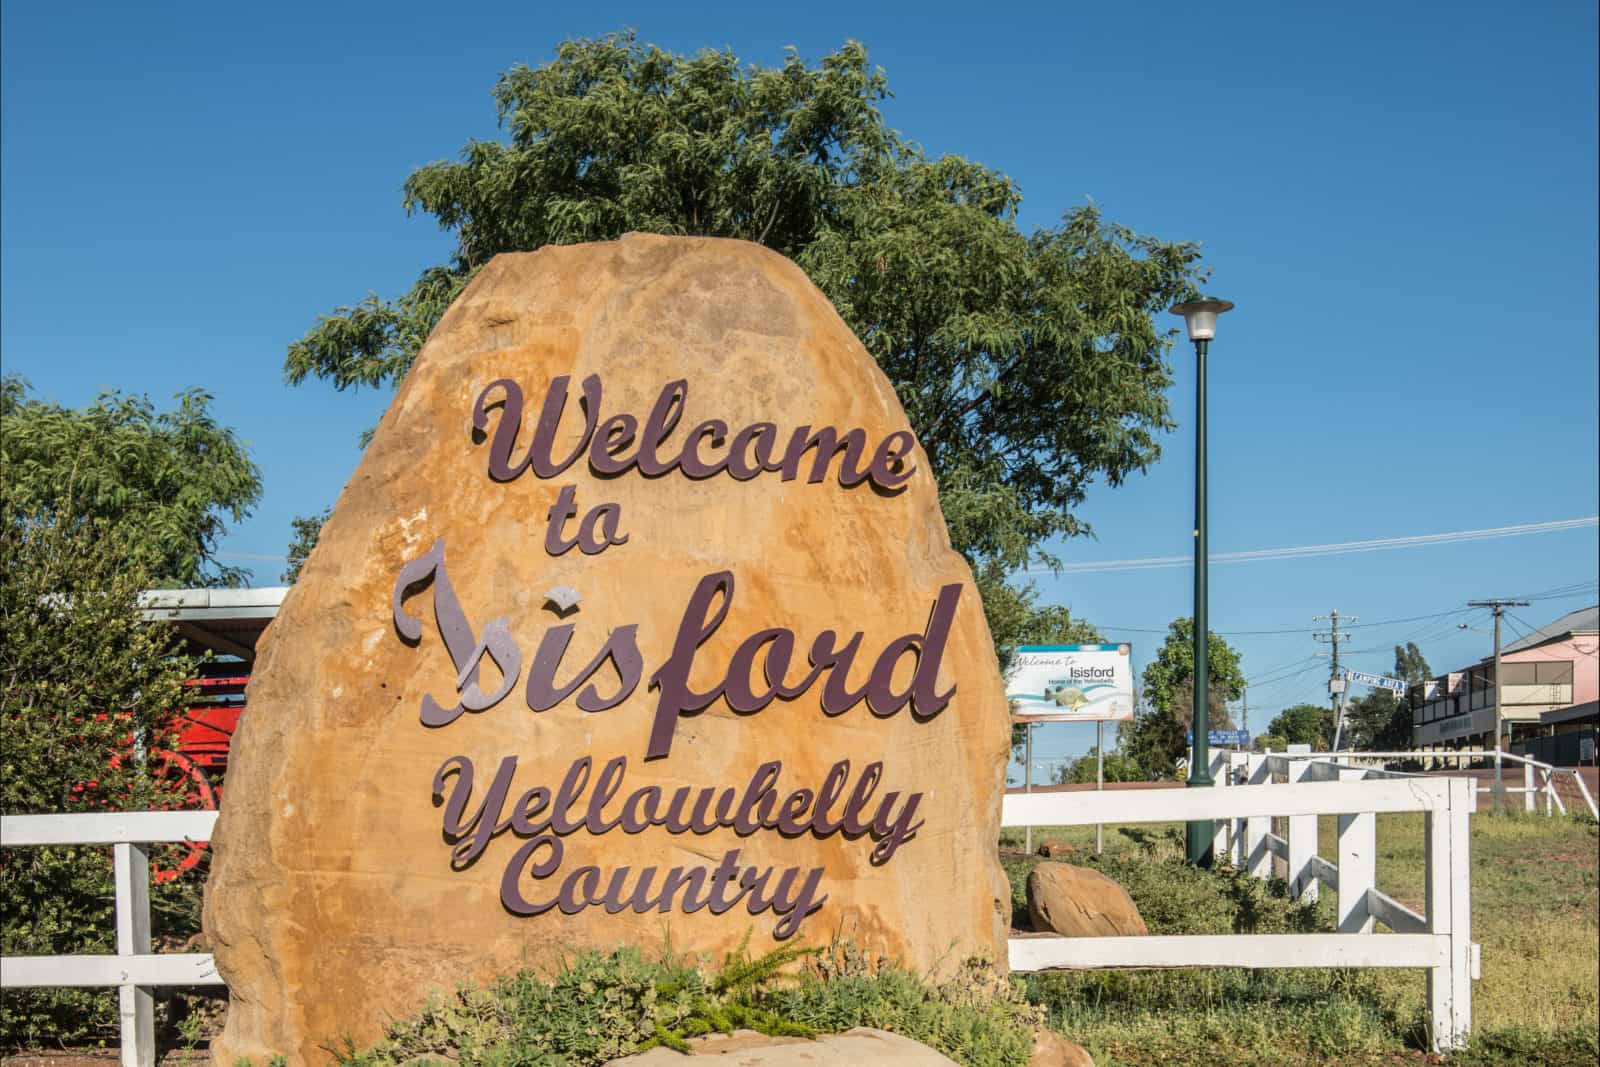 Isisford Entry sign